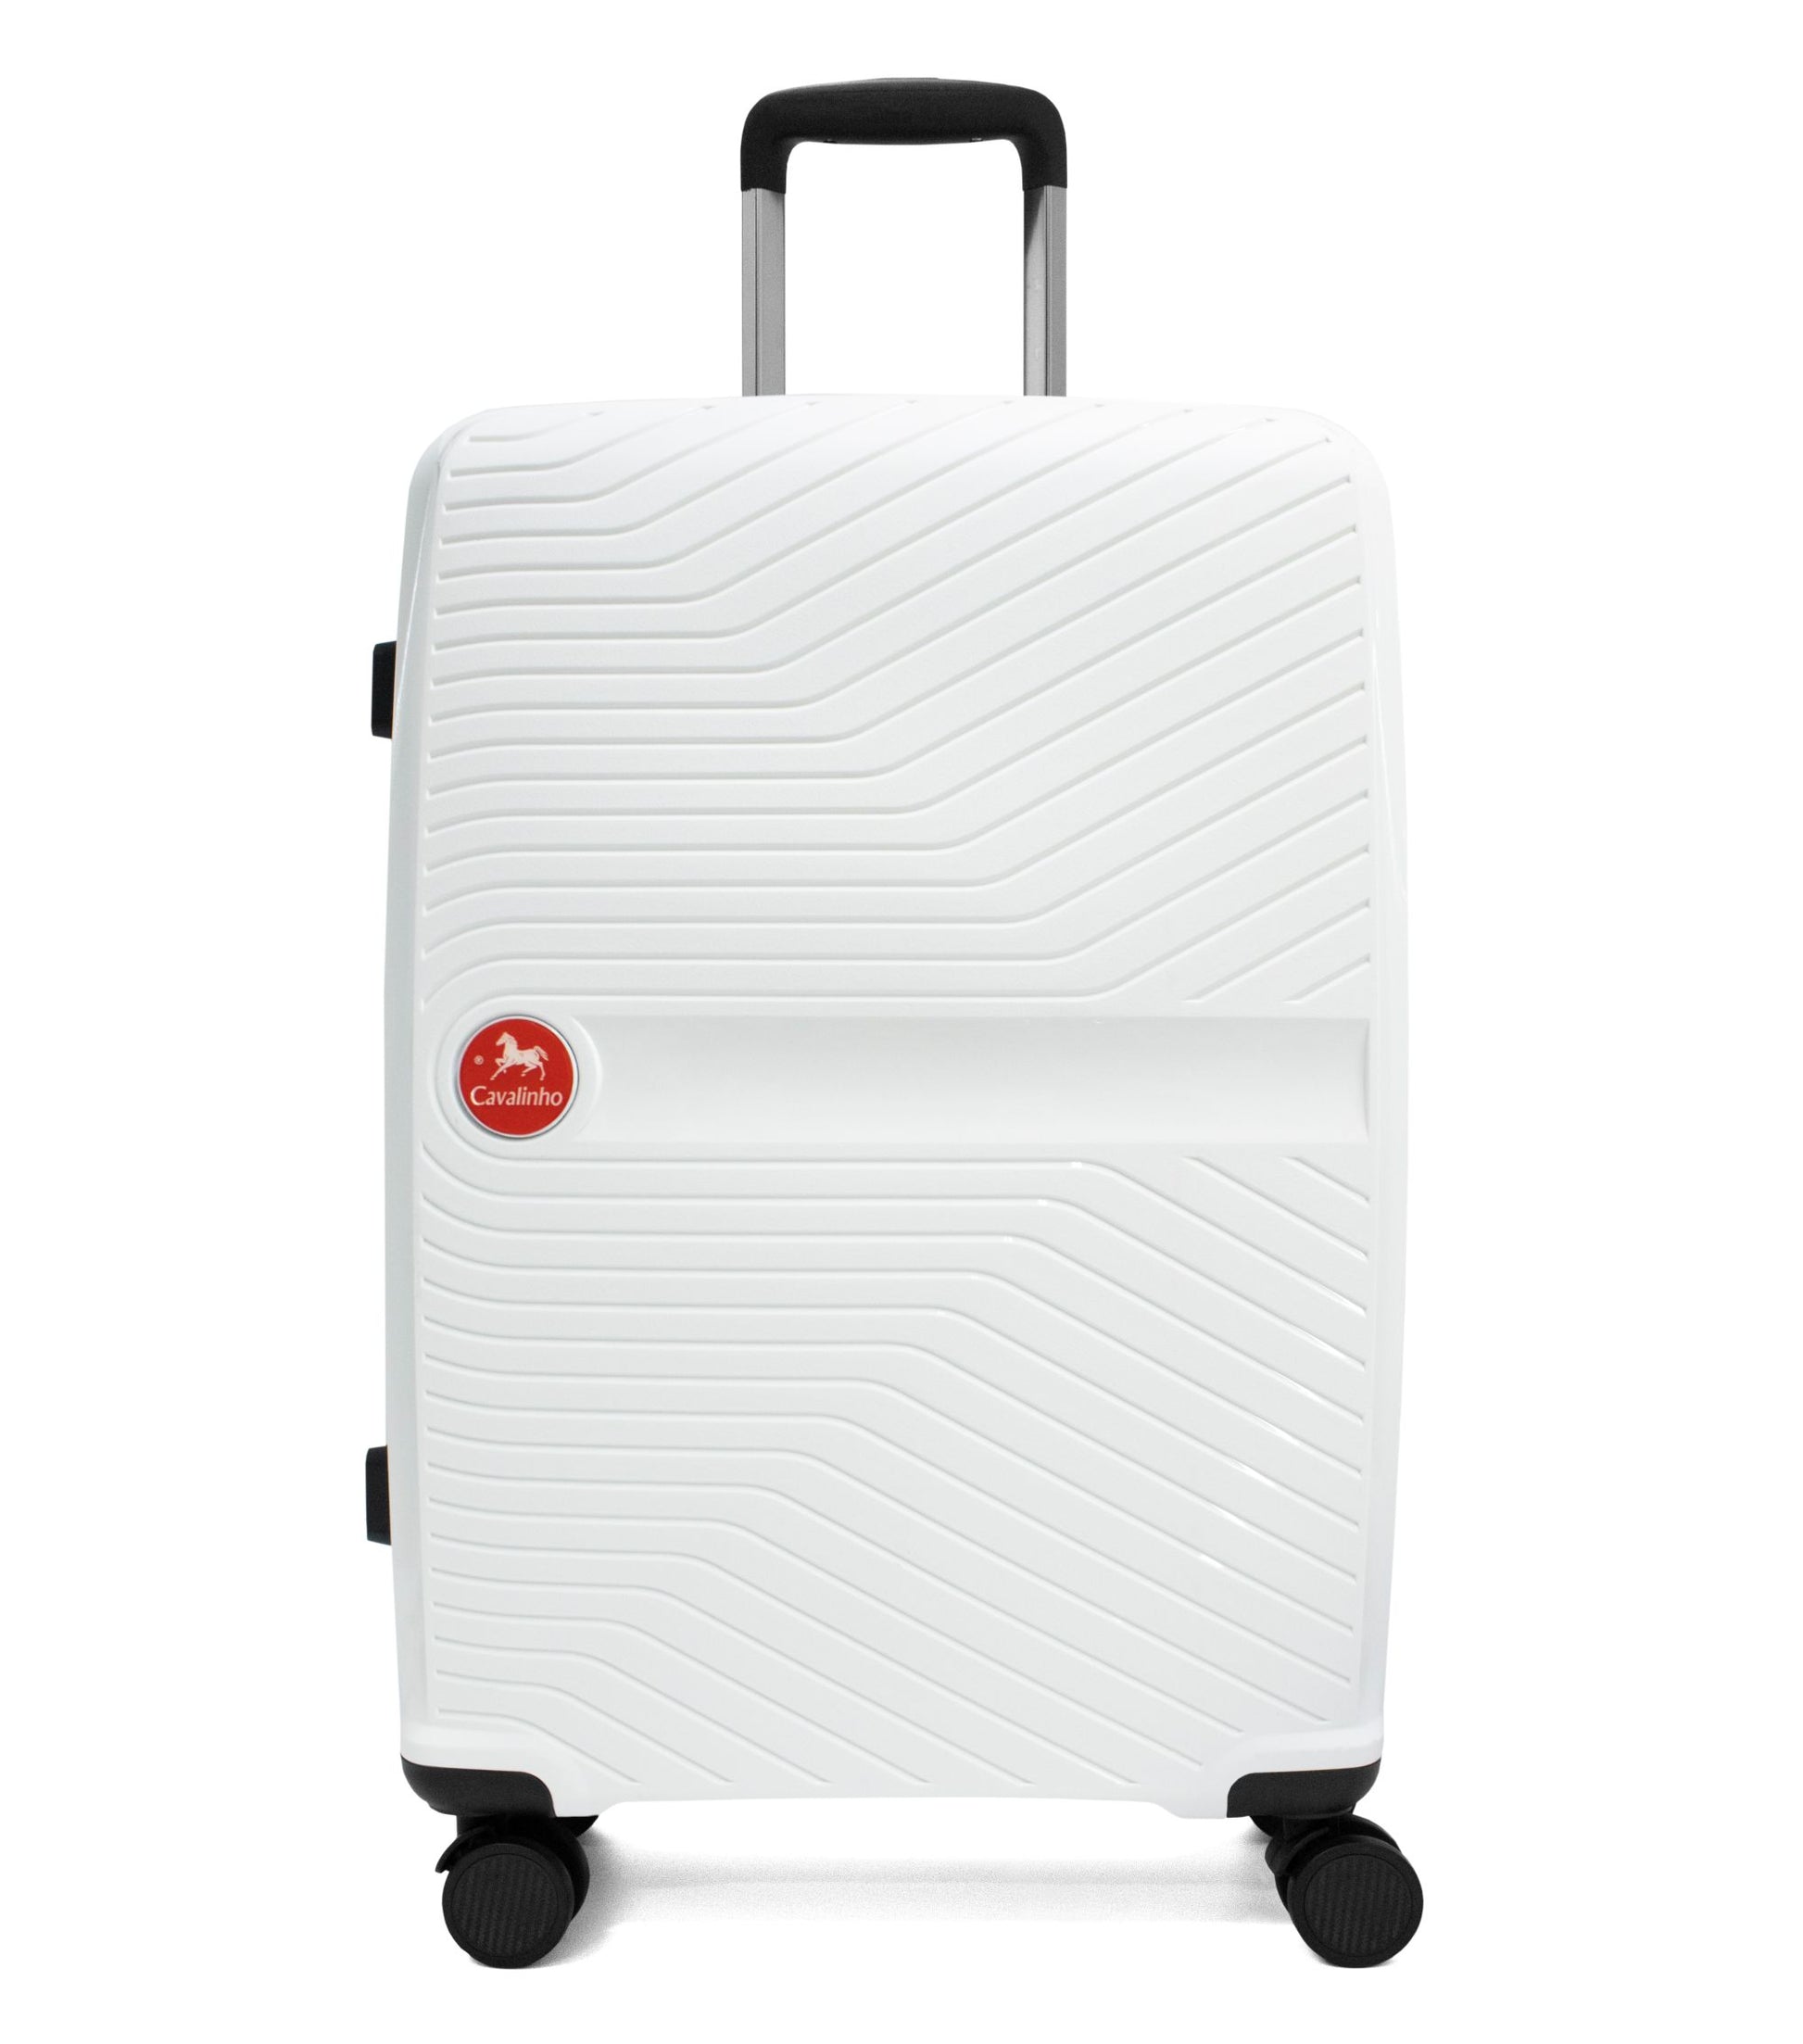 Cavalinho Colorful Check-in Hardside Luggage (24") - 24 inch White - 68020004.06.24_1